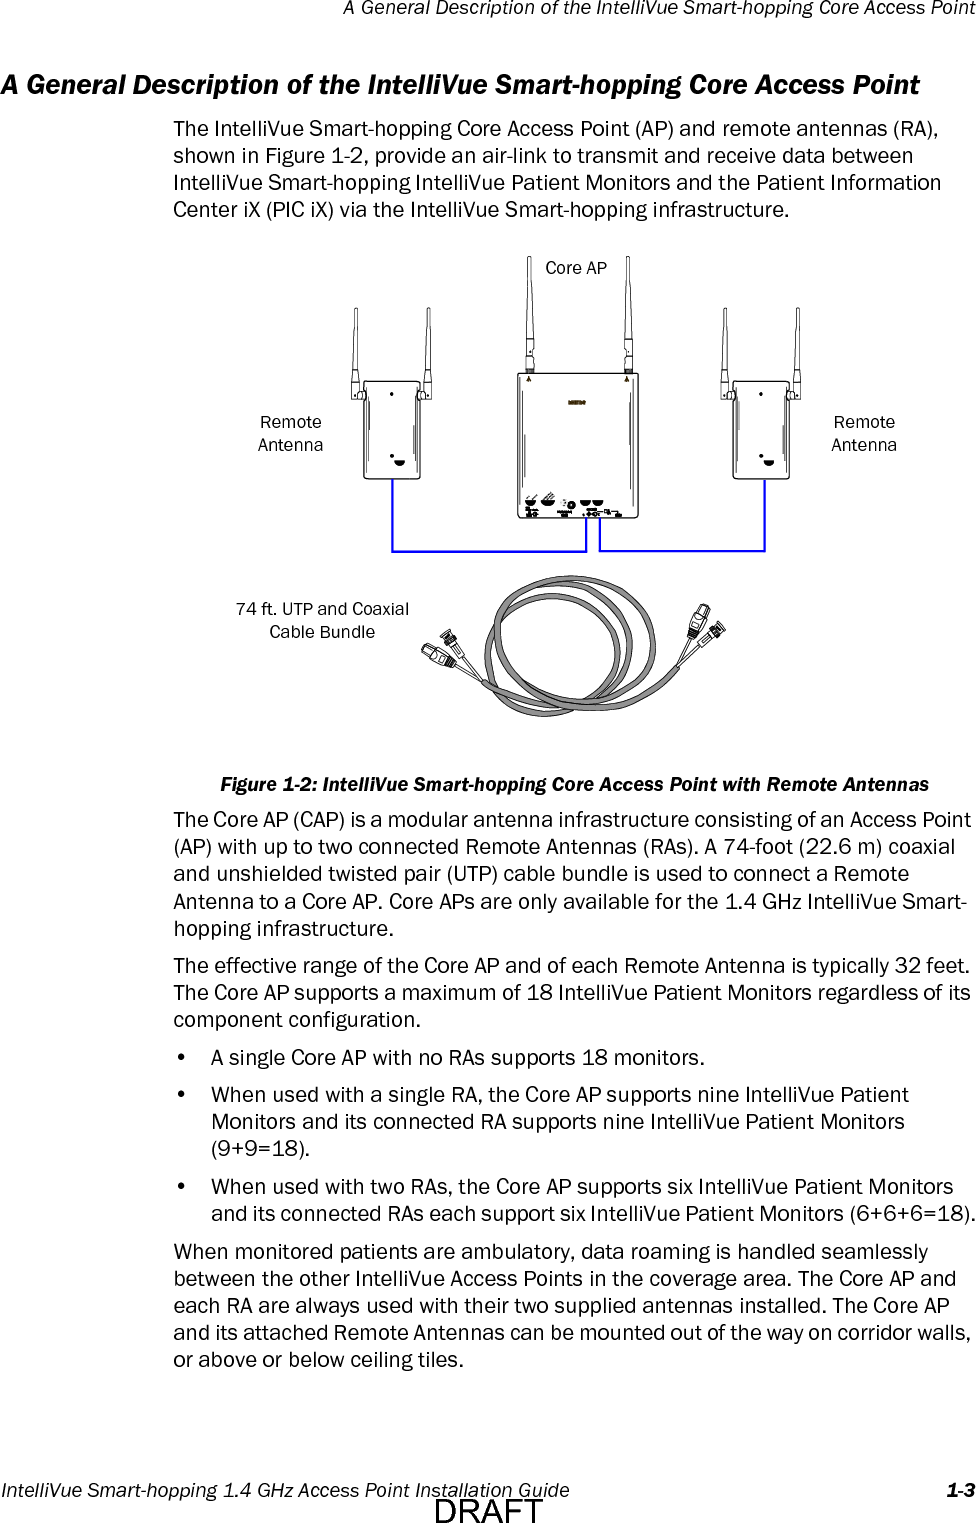 A General Description of the IntelliVue Smart-hopping Core Access PointIntelliVue Smart-hopping 1.4 GHz Access Point Installation Guide 1-3A General Description of the IntelliVue Smart-hopping Core Access PointThe IntelliVue Smart-hopping Core Access Point (AP) and remote antennas (RA), shown in Figure 1-2, provide an air-link to transmit and receive data between IntelliVue Smart-hopping IntelliVue Patient Monitors and the Patient Information Center iX (PIC iX) via the IntelliVue Smart-hopping infrastructure.Figure 1-2: IntelliVue Smart-hopping Core Access Point with Remote AntennasThe Core AP (CAP) is a modular antenna infrastructure consisting of an Access Point (AP) with up to two connected Remote Antennas (RAs). A 74-foot (22.6 m) coaxial and unshielded twisted pair (UTP) cable bundle is used to connect a Remote Antenna to a Core AP. Core APs are only available for the 1.4 GHz IntelliVue Smart-hopping infrastructure.The effective range of the Core AP and of each Remote Antenna is typically 32 feet. The Core AP supports a maximum of 18 IntelliVue Patient Monitors regardless of its component configuration. • A single Core AP with no RAs supports 18 monitors.• When used with a single RA, the Core AP supports nine IntelliVue PatientMonitors and its connected RA supports nine IntelliVue Patient Monitors(9+9=18).•When used with two RAs, the Core AP supports six IntelliVue Patient Monitorsand its connected RAs each support six IntelliVue Patient Monitors (6+6+6=18).When monitored patients are ambulatory, data roaming is handled seamlessly between the other IntelliVue Access Points in the coverage area. The Core AP and each RA are always used with their two supplied antennas installed. The Core AP and its attached Remote Antennas can be mounted out of the way on corridor walls, or above or below ceiling tiles.Core APRemoteAntennaRemoteAntenna74 ft. UTP and Coaxial Cable BundleDRAFT